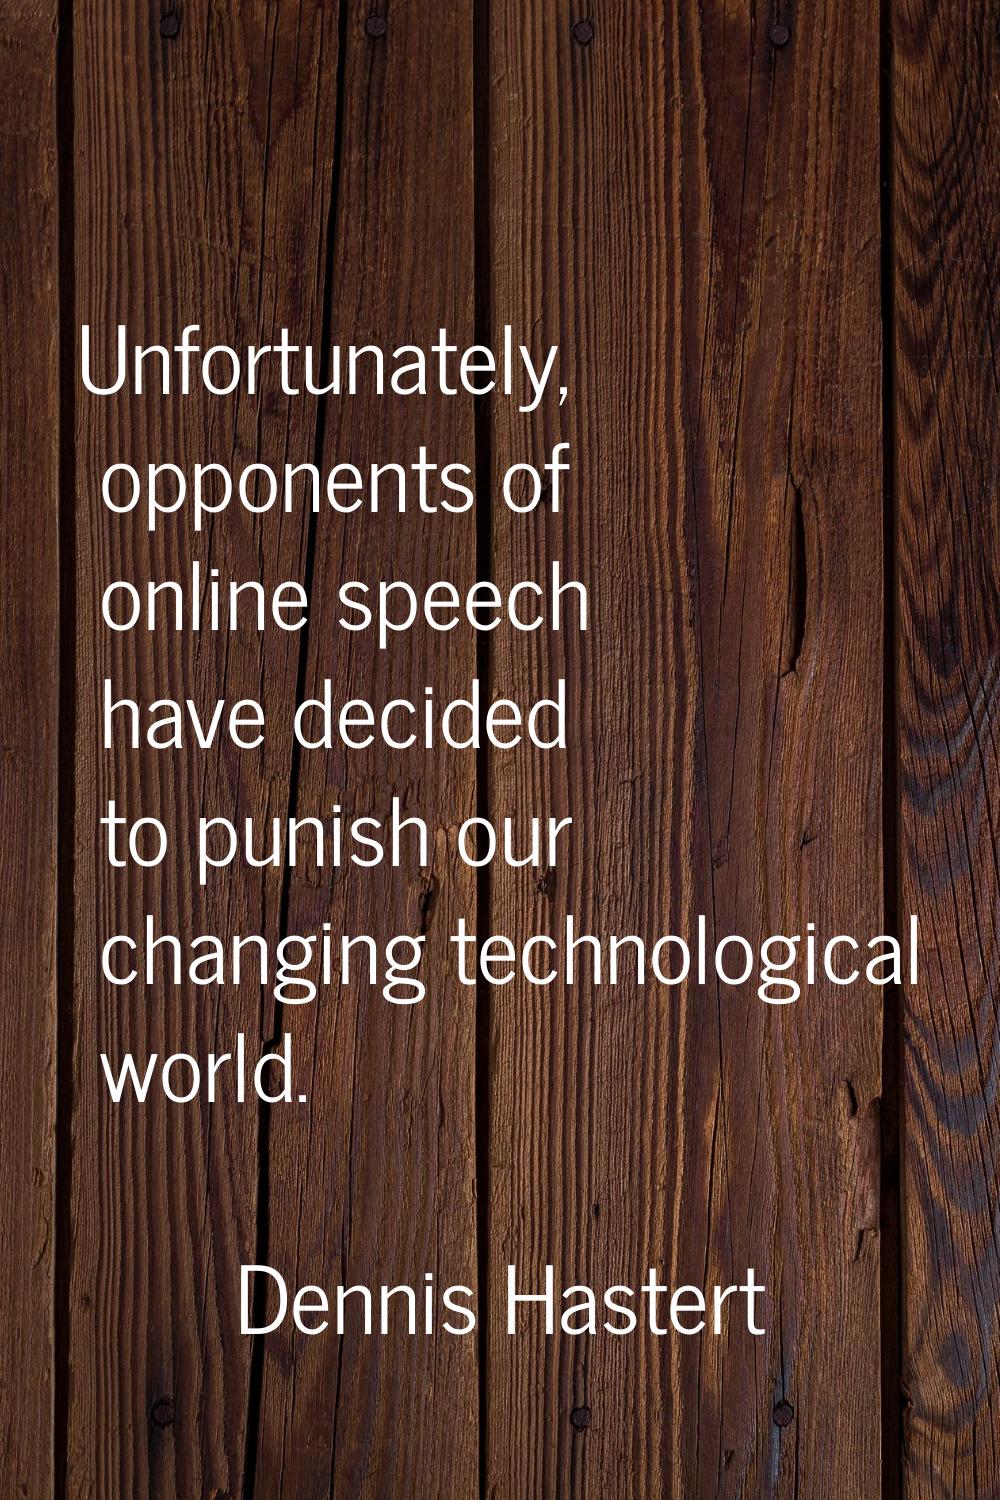 Unfortunately, opponents of online speech have decided to punish our changing technological world.